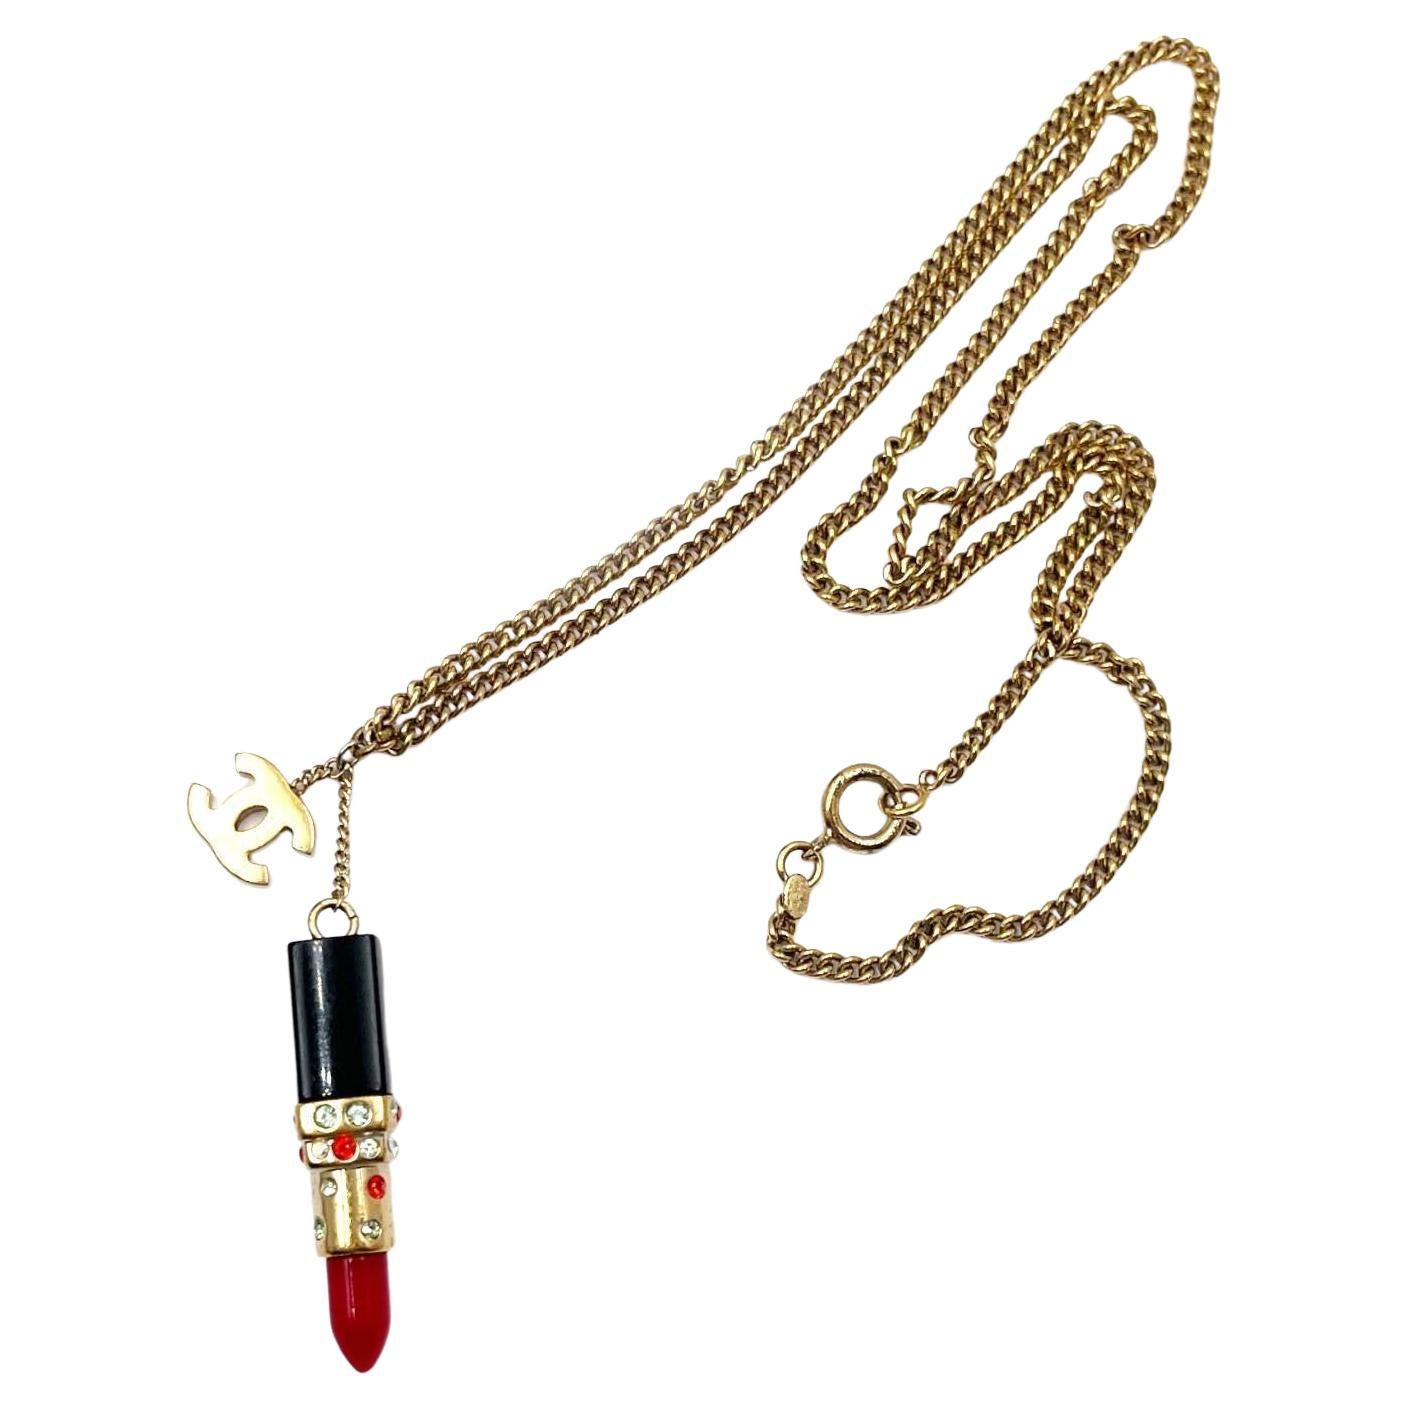 Chanel Rare Vintage Gold Plated CC Large Red Lipstick Pendant Necklace